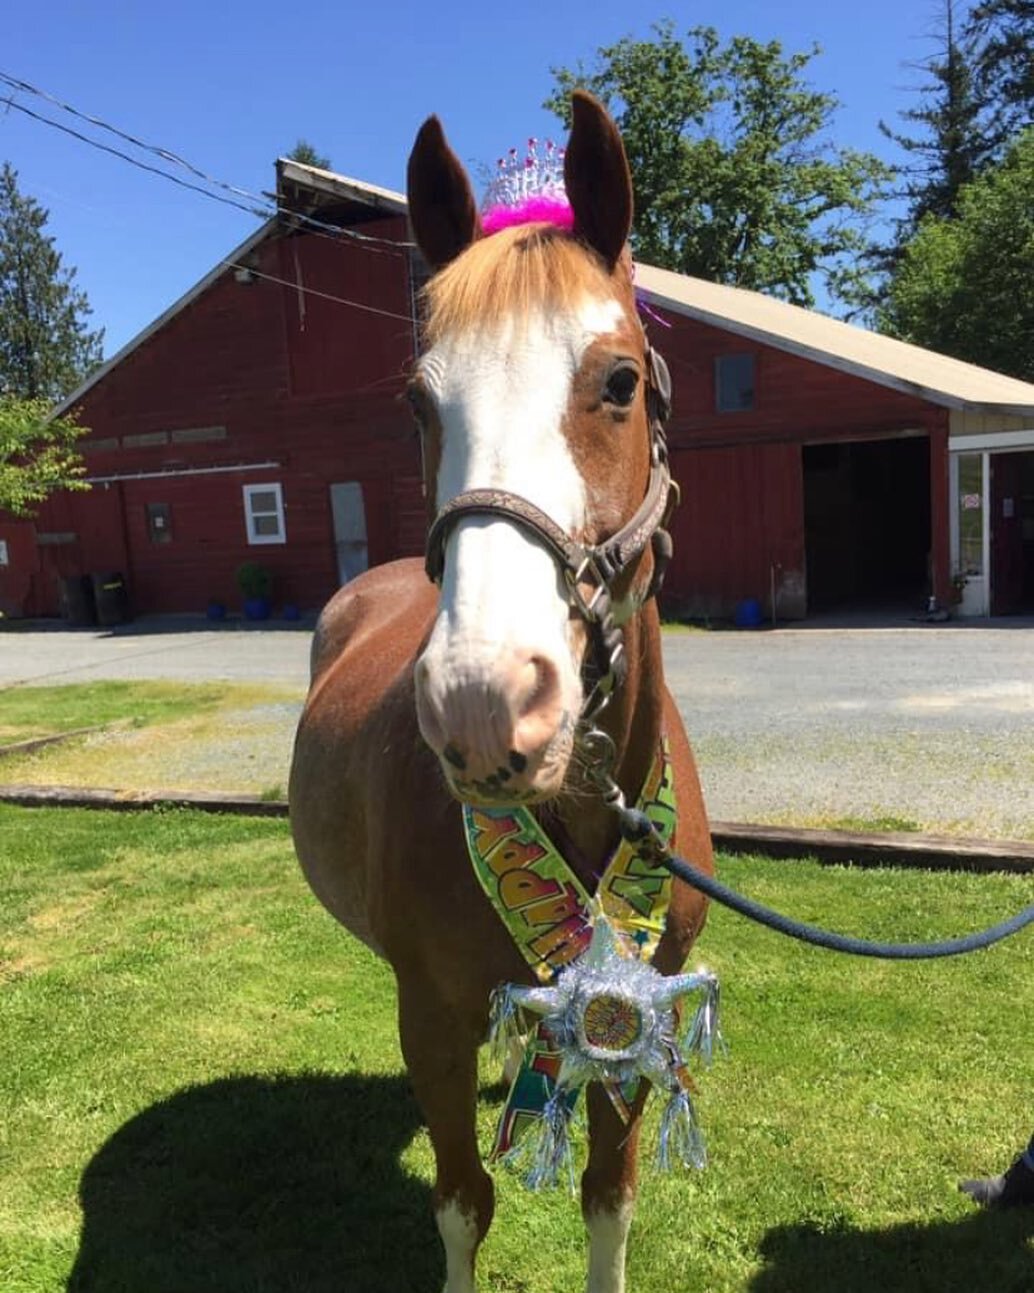 Happy Birthday Rosie!!!

Our resident jokster and award winning movie star turns 24 today. Thank you to her amazing owner Lindy for letting us use her in our programs! 

#happybirthday #rosie #paint #moviestar #awardwinning #cute #weloveourhorses #ho